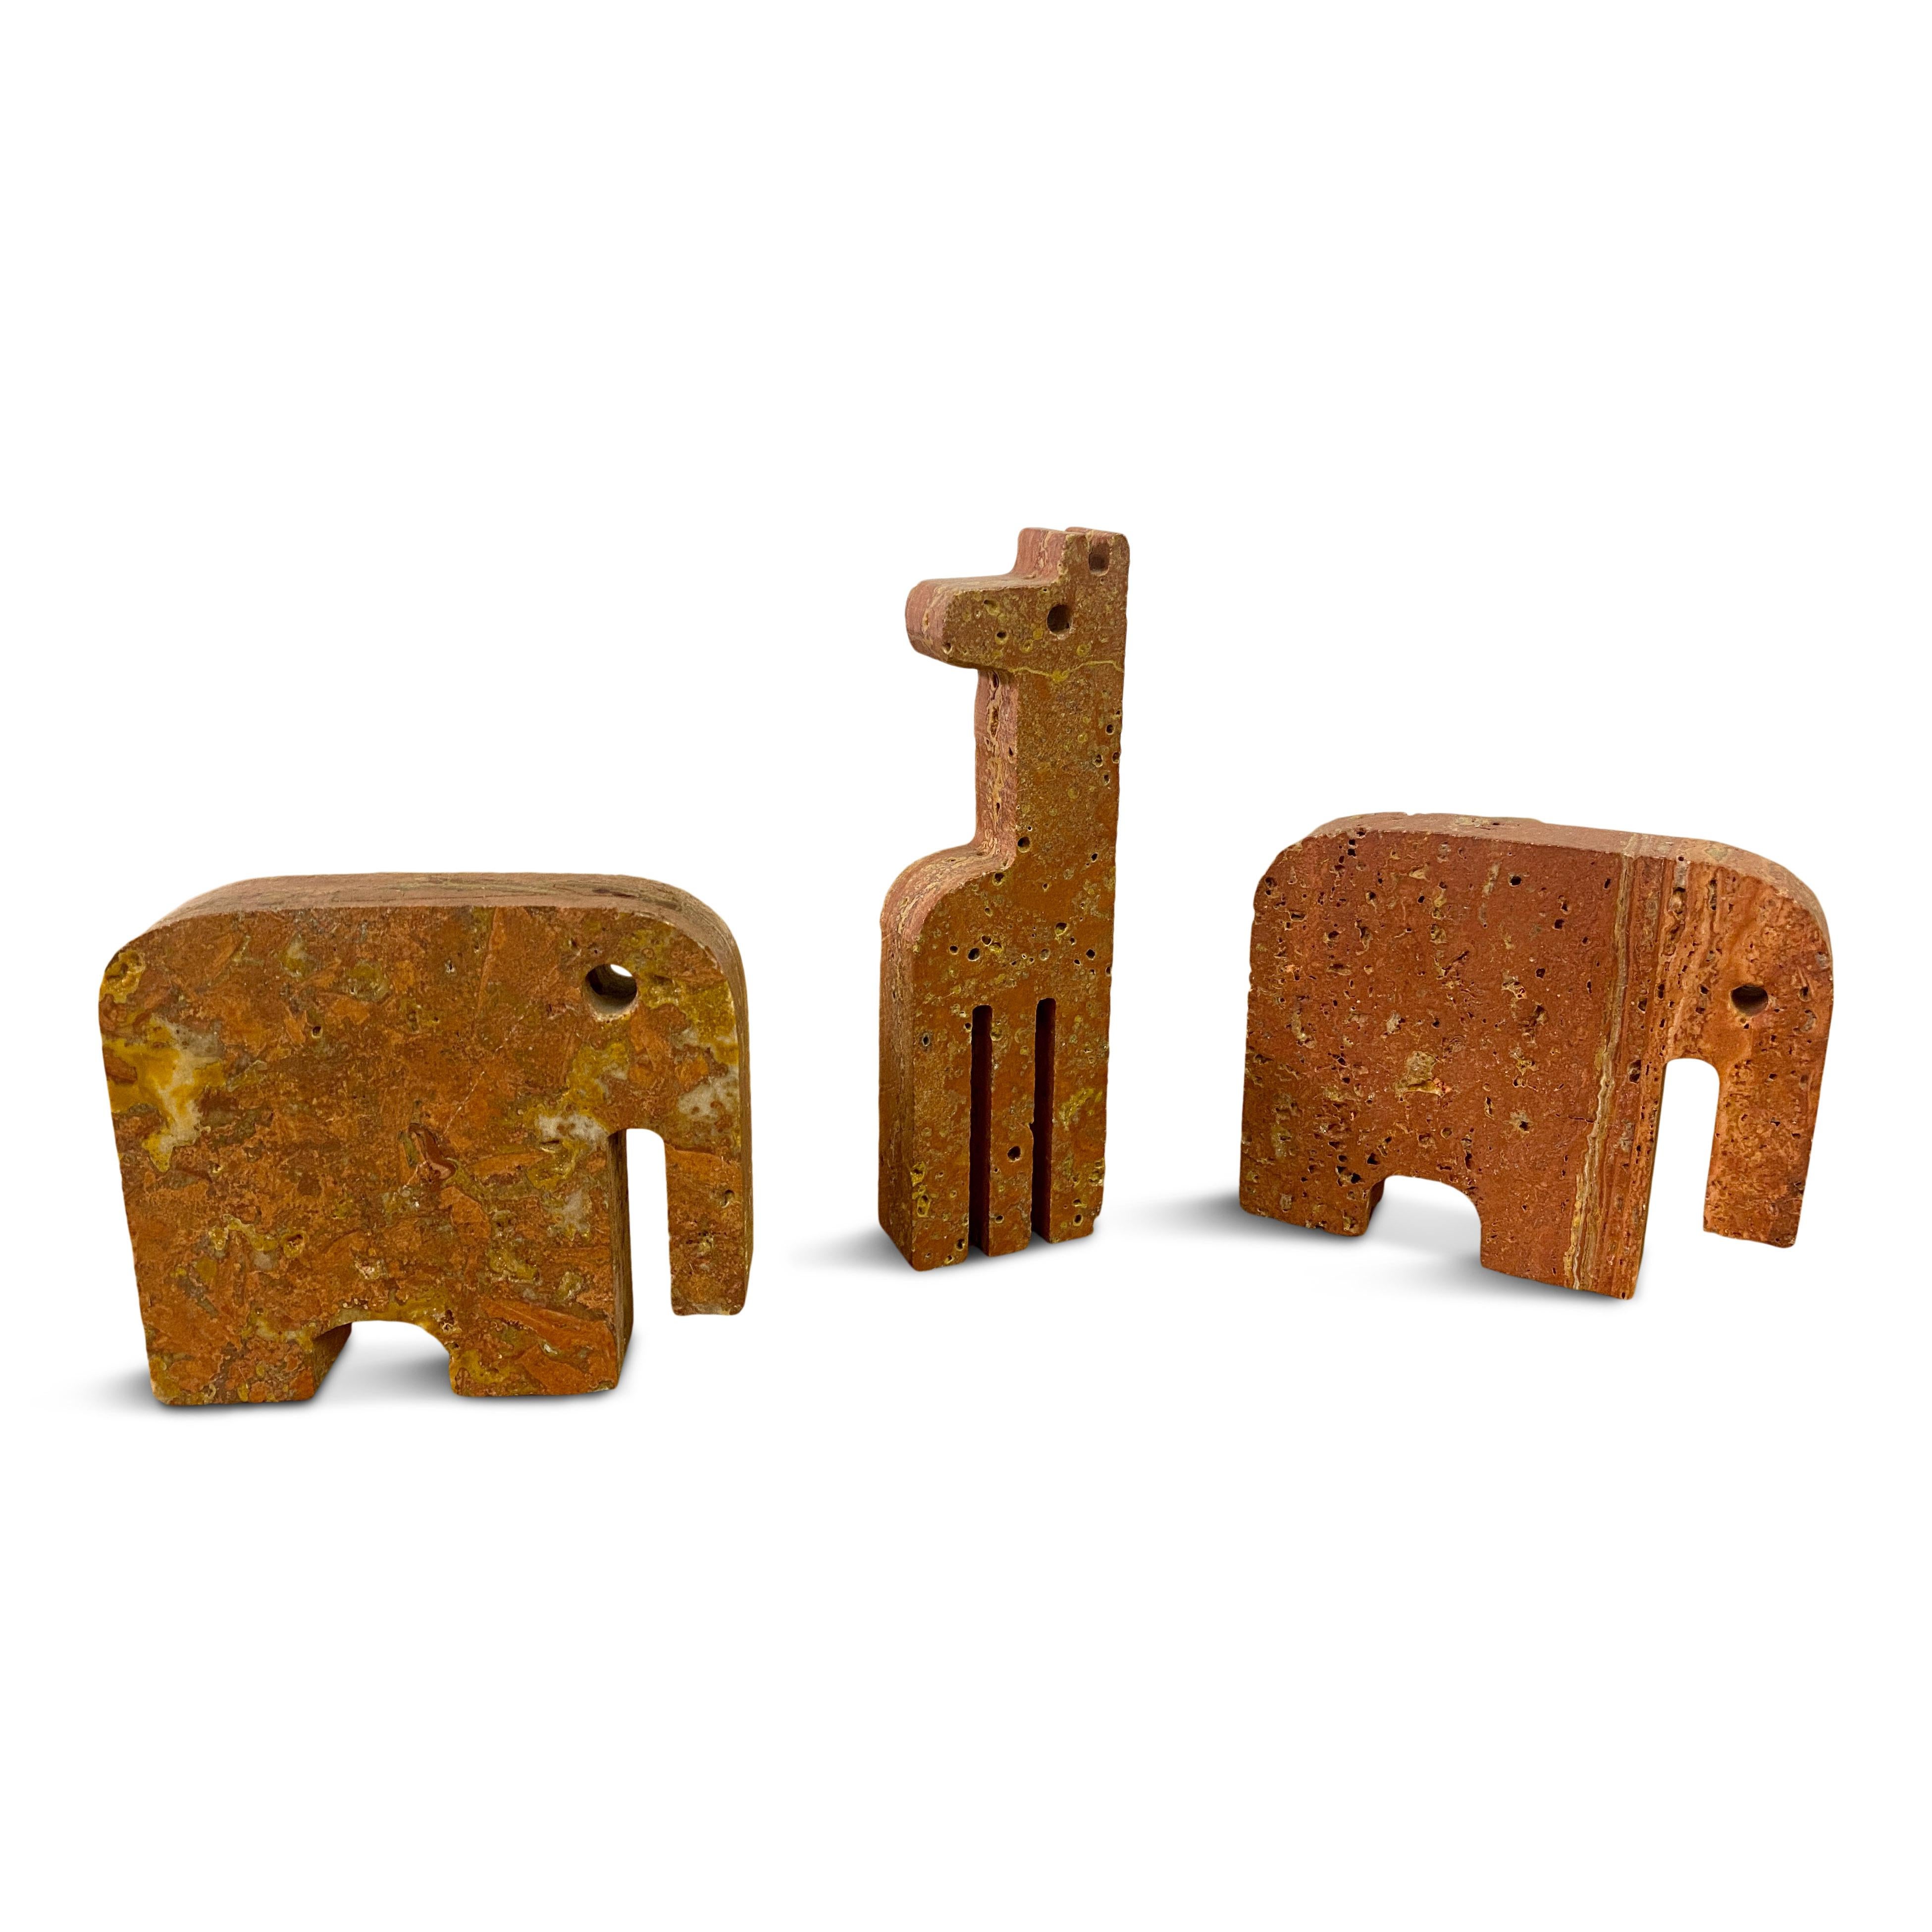 Set of three bookends

Made from red travertine

One giraffe and a pair of elephants

By Fratelli Mannelli

Giraffe measures 13 x 4 x 2

Italy 1970s/1980s